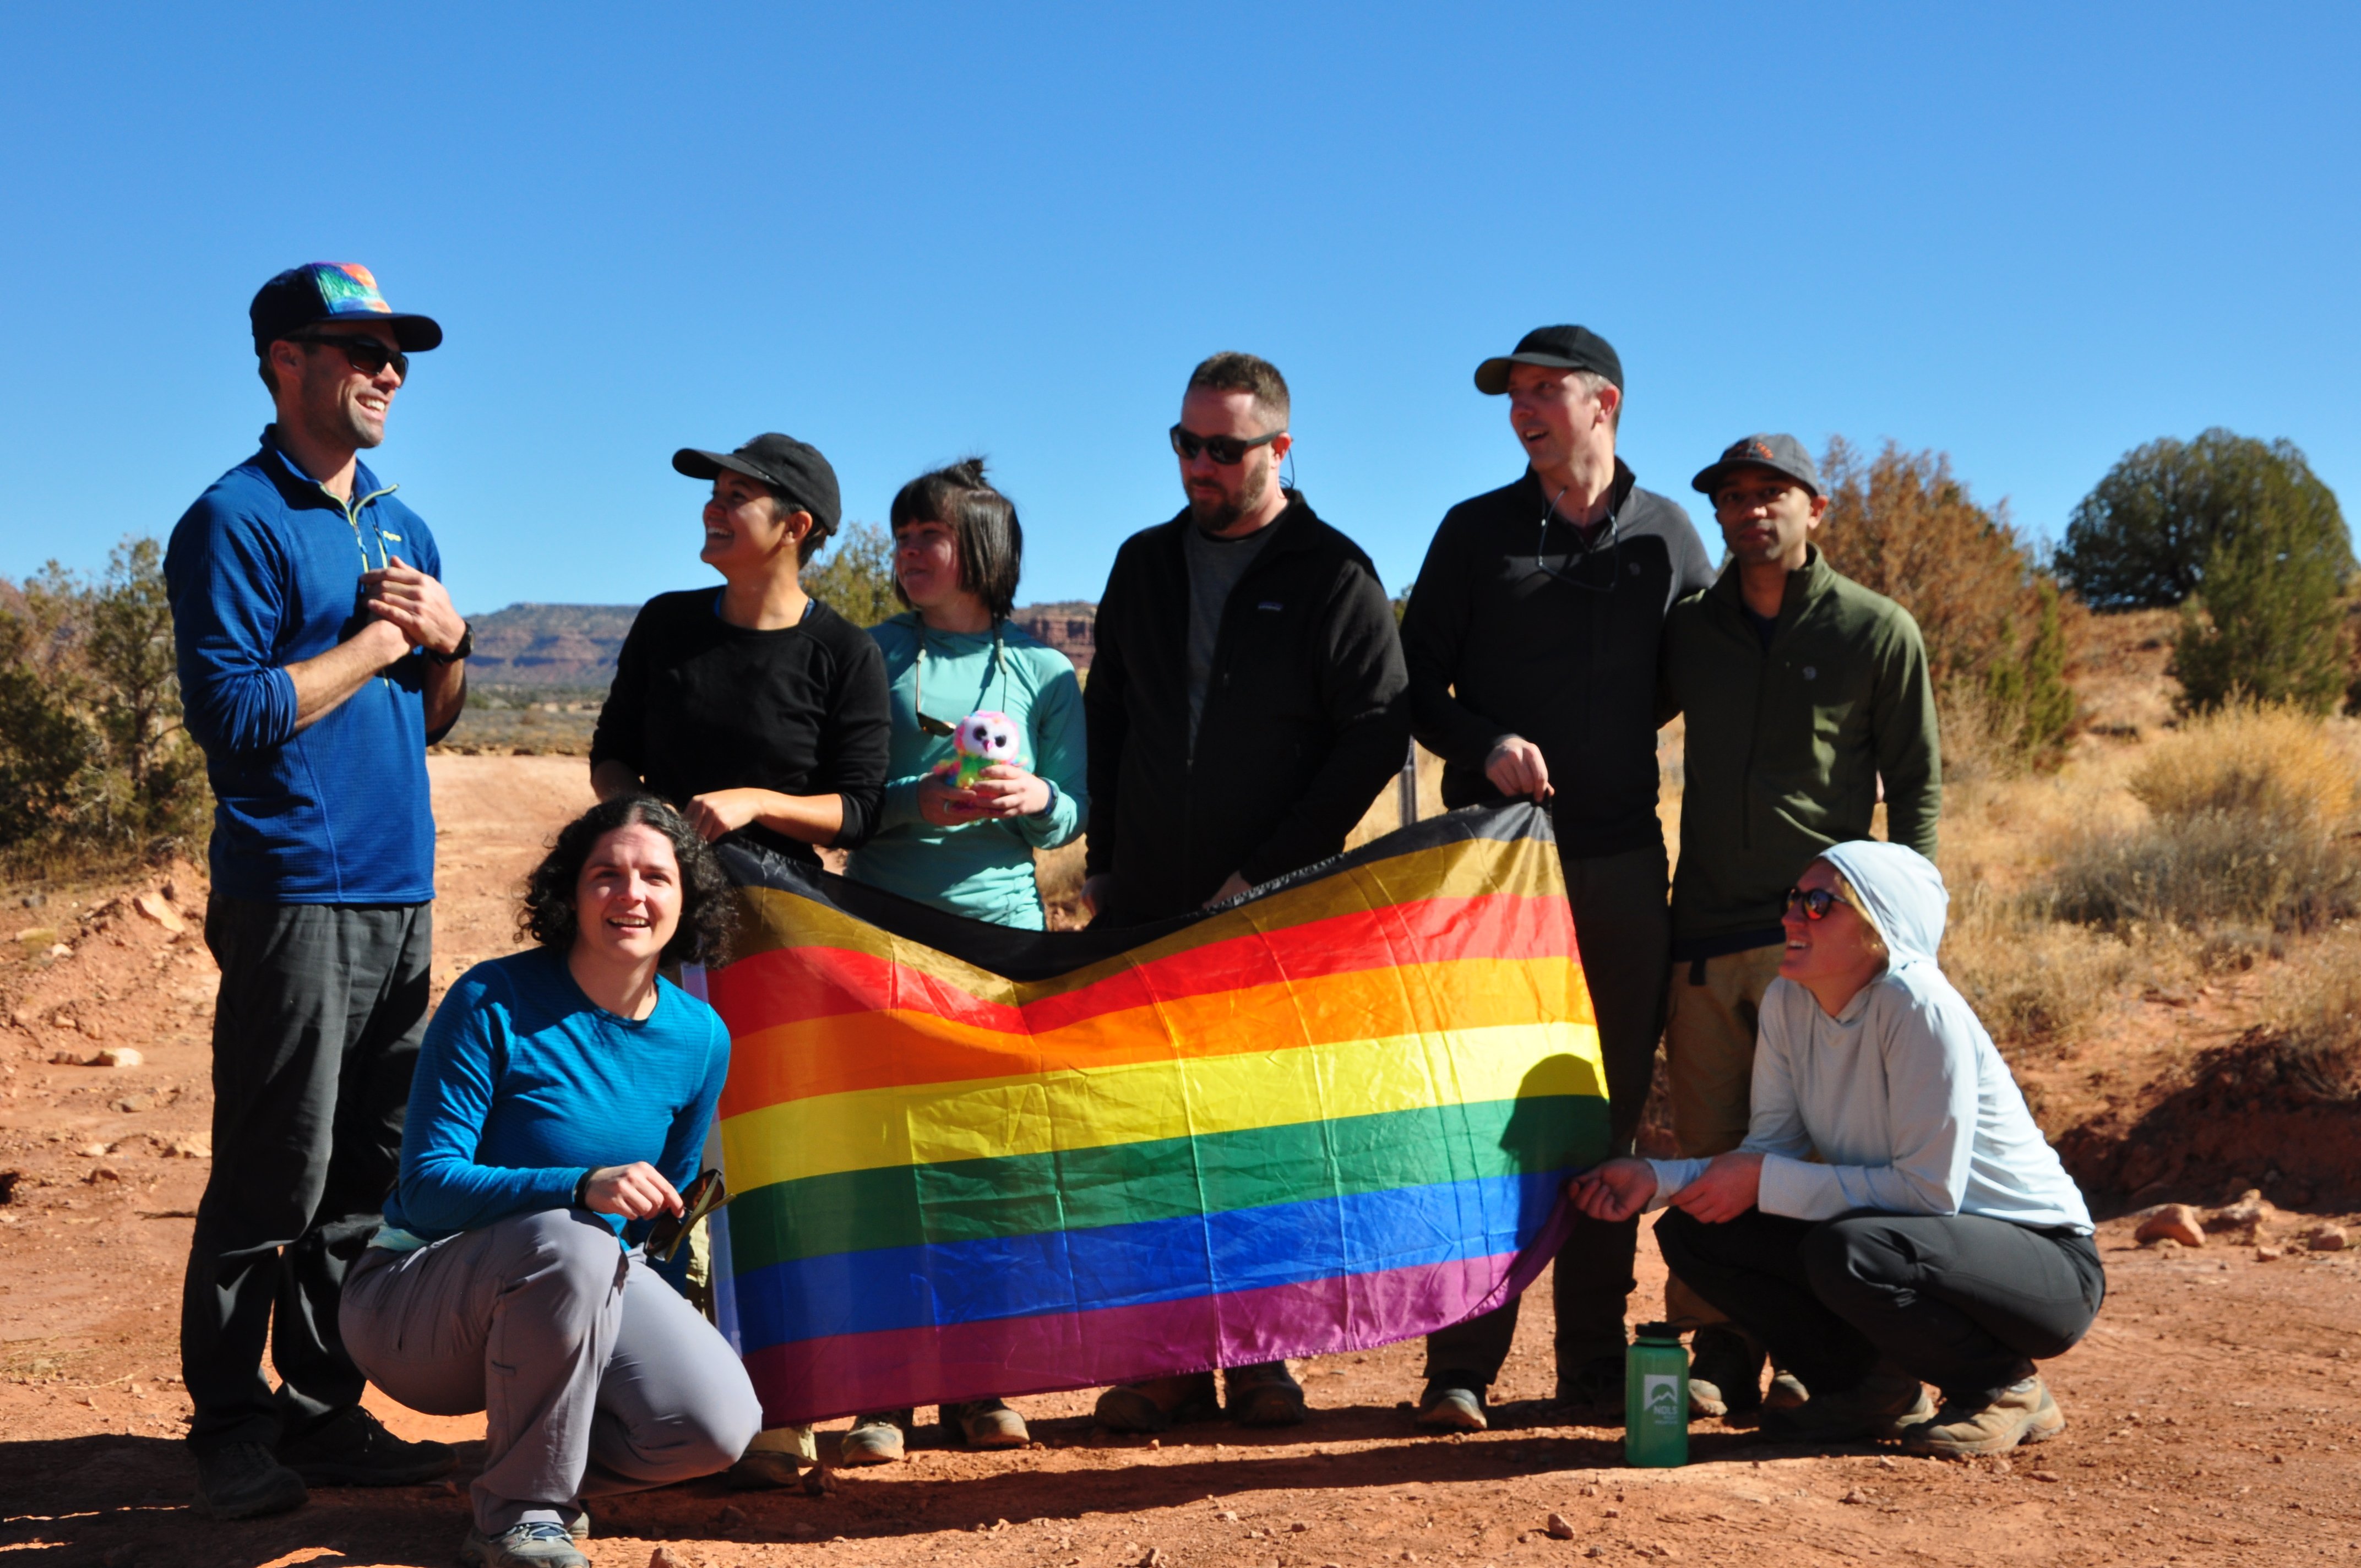 NOLS students pose for a group photo with rainbow flag in Utah's canyonlands